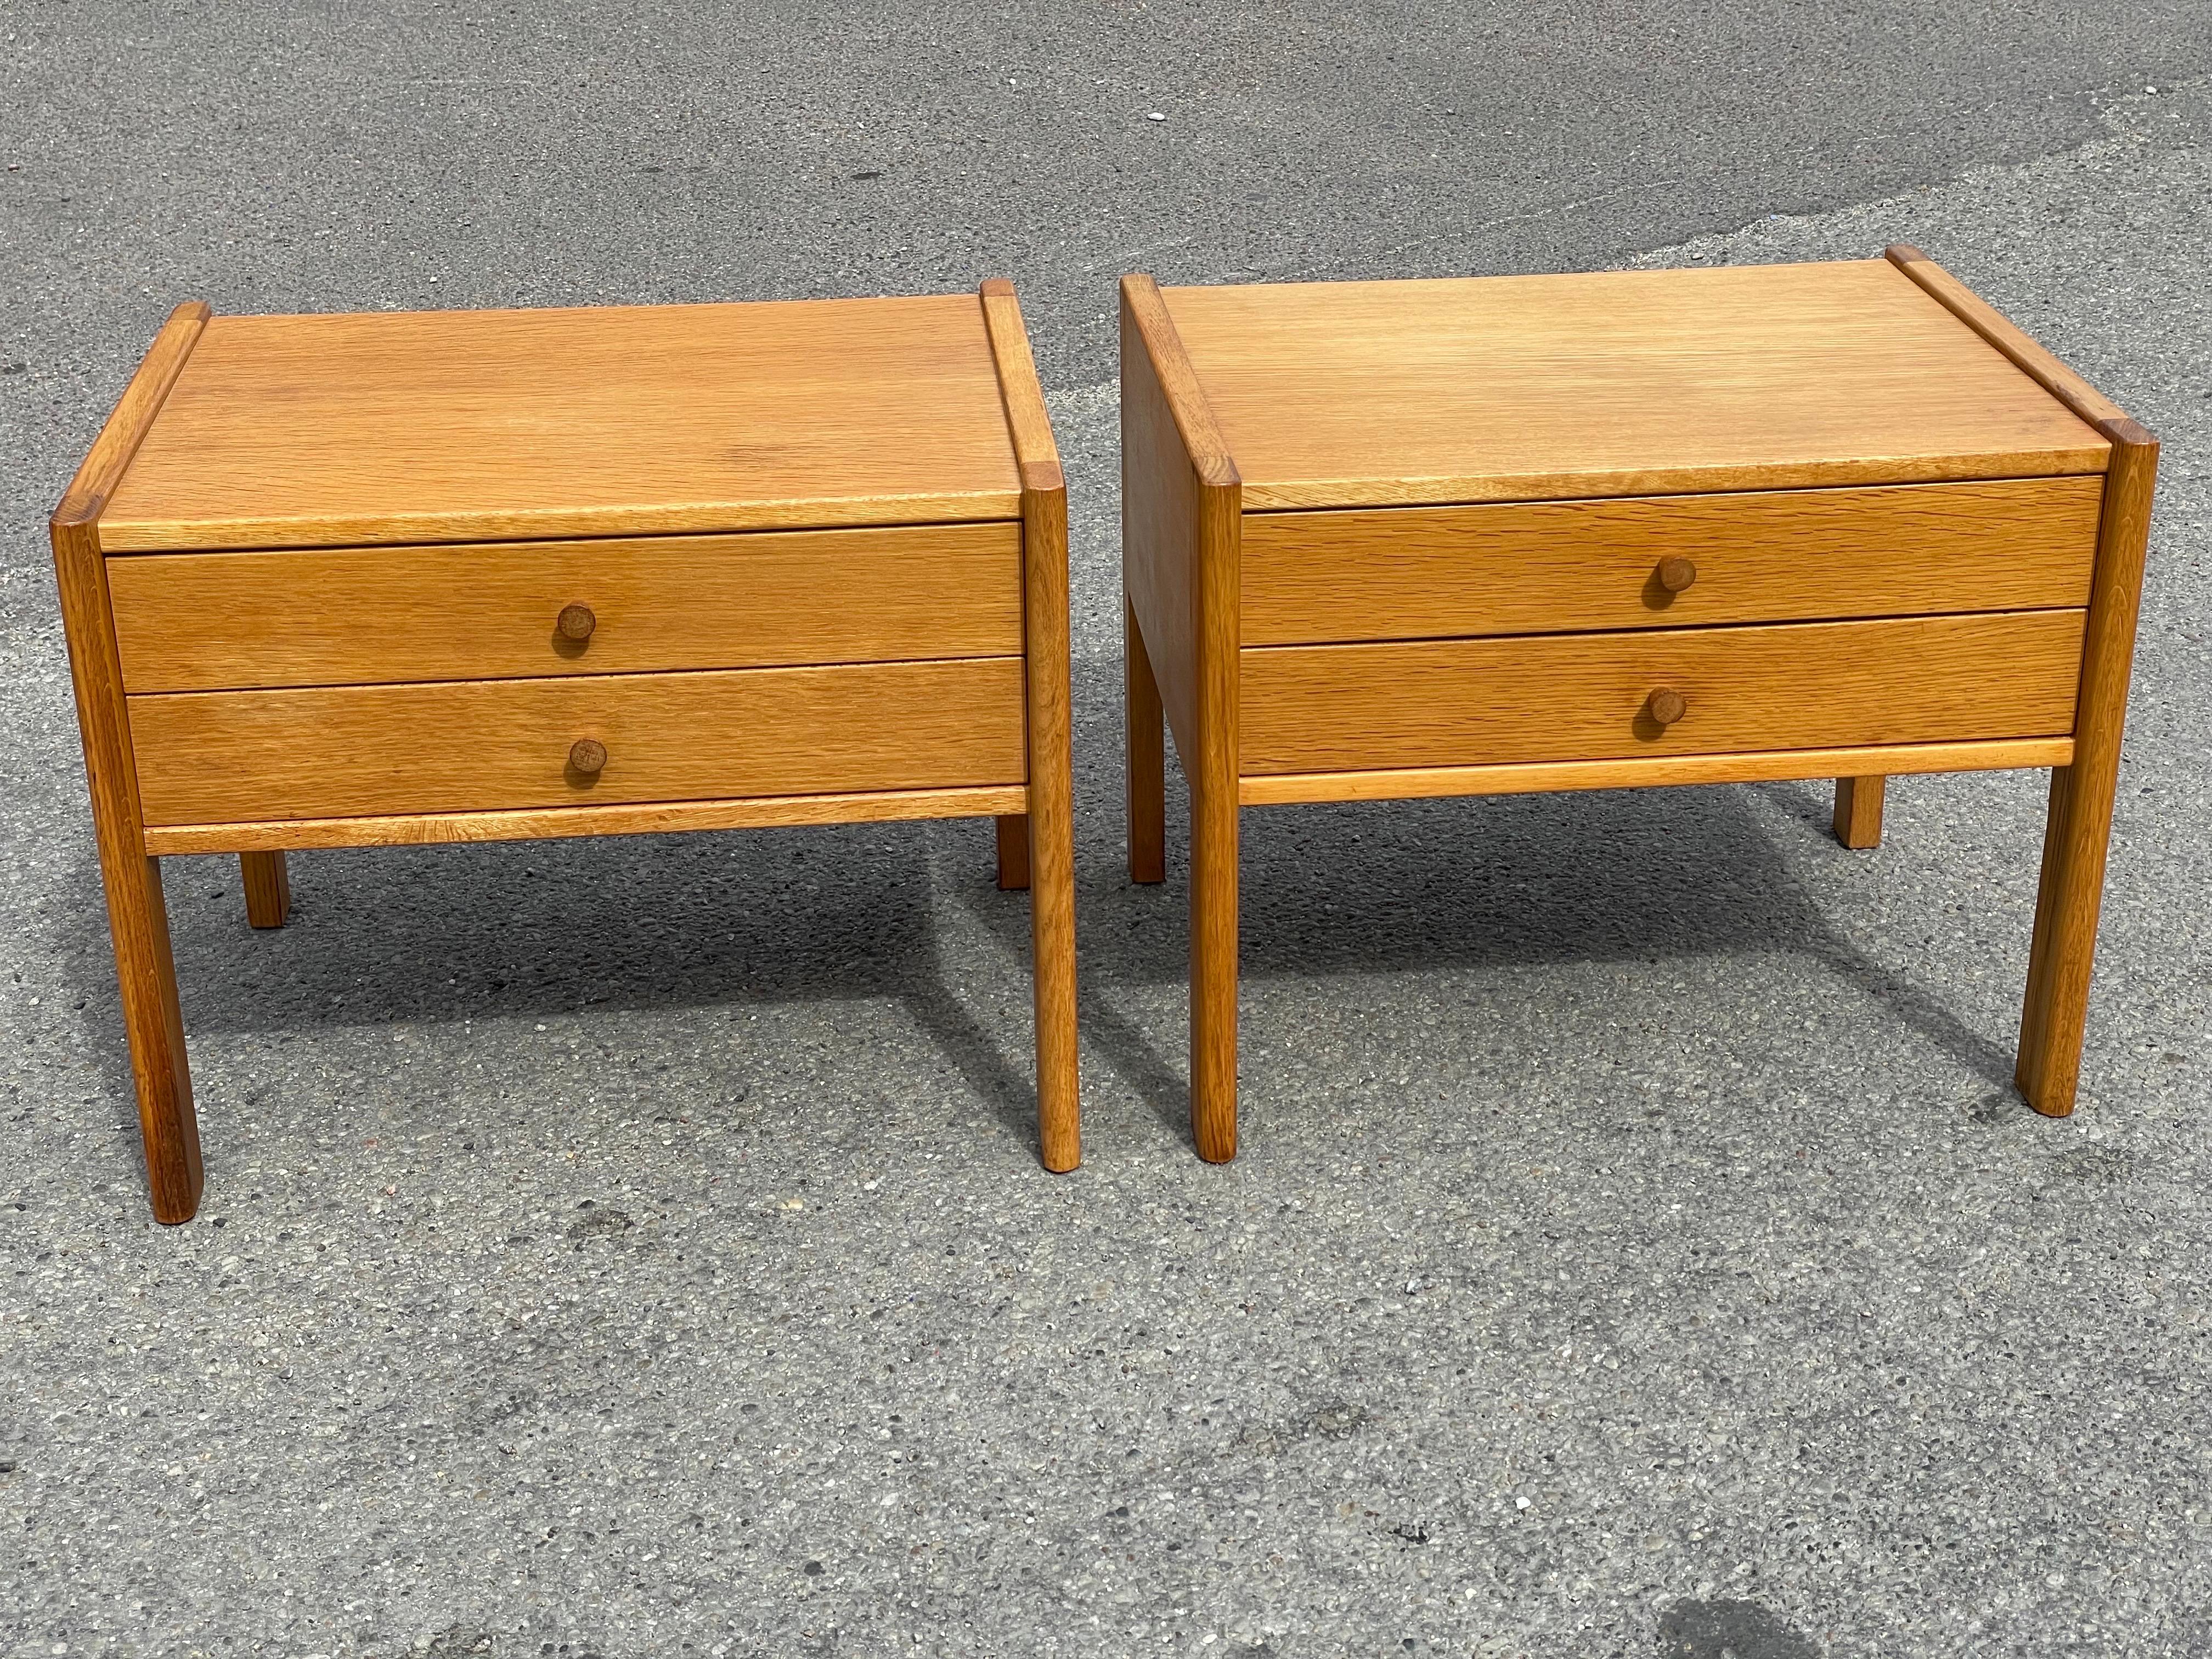 Extraordinary beautiful Danish Mid-Century Modern nightstands in oak. Strong and simple with the characteristic minimalistic design that defines the work of the danish 1960's design.